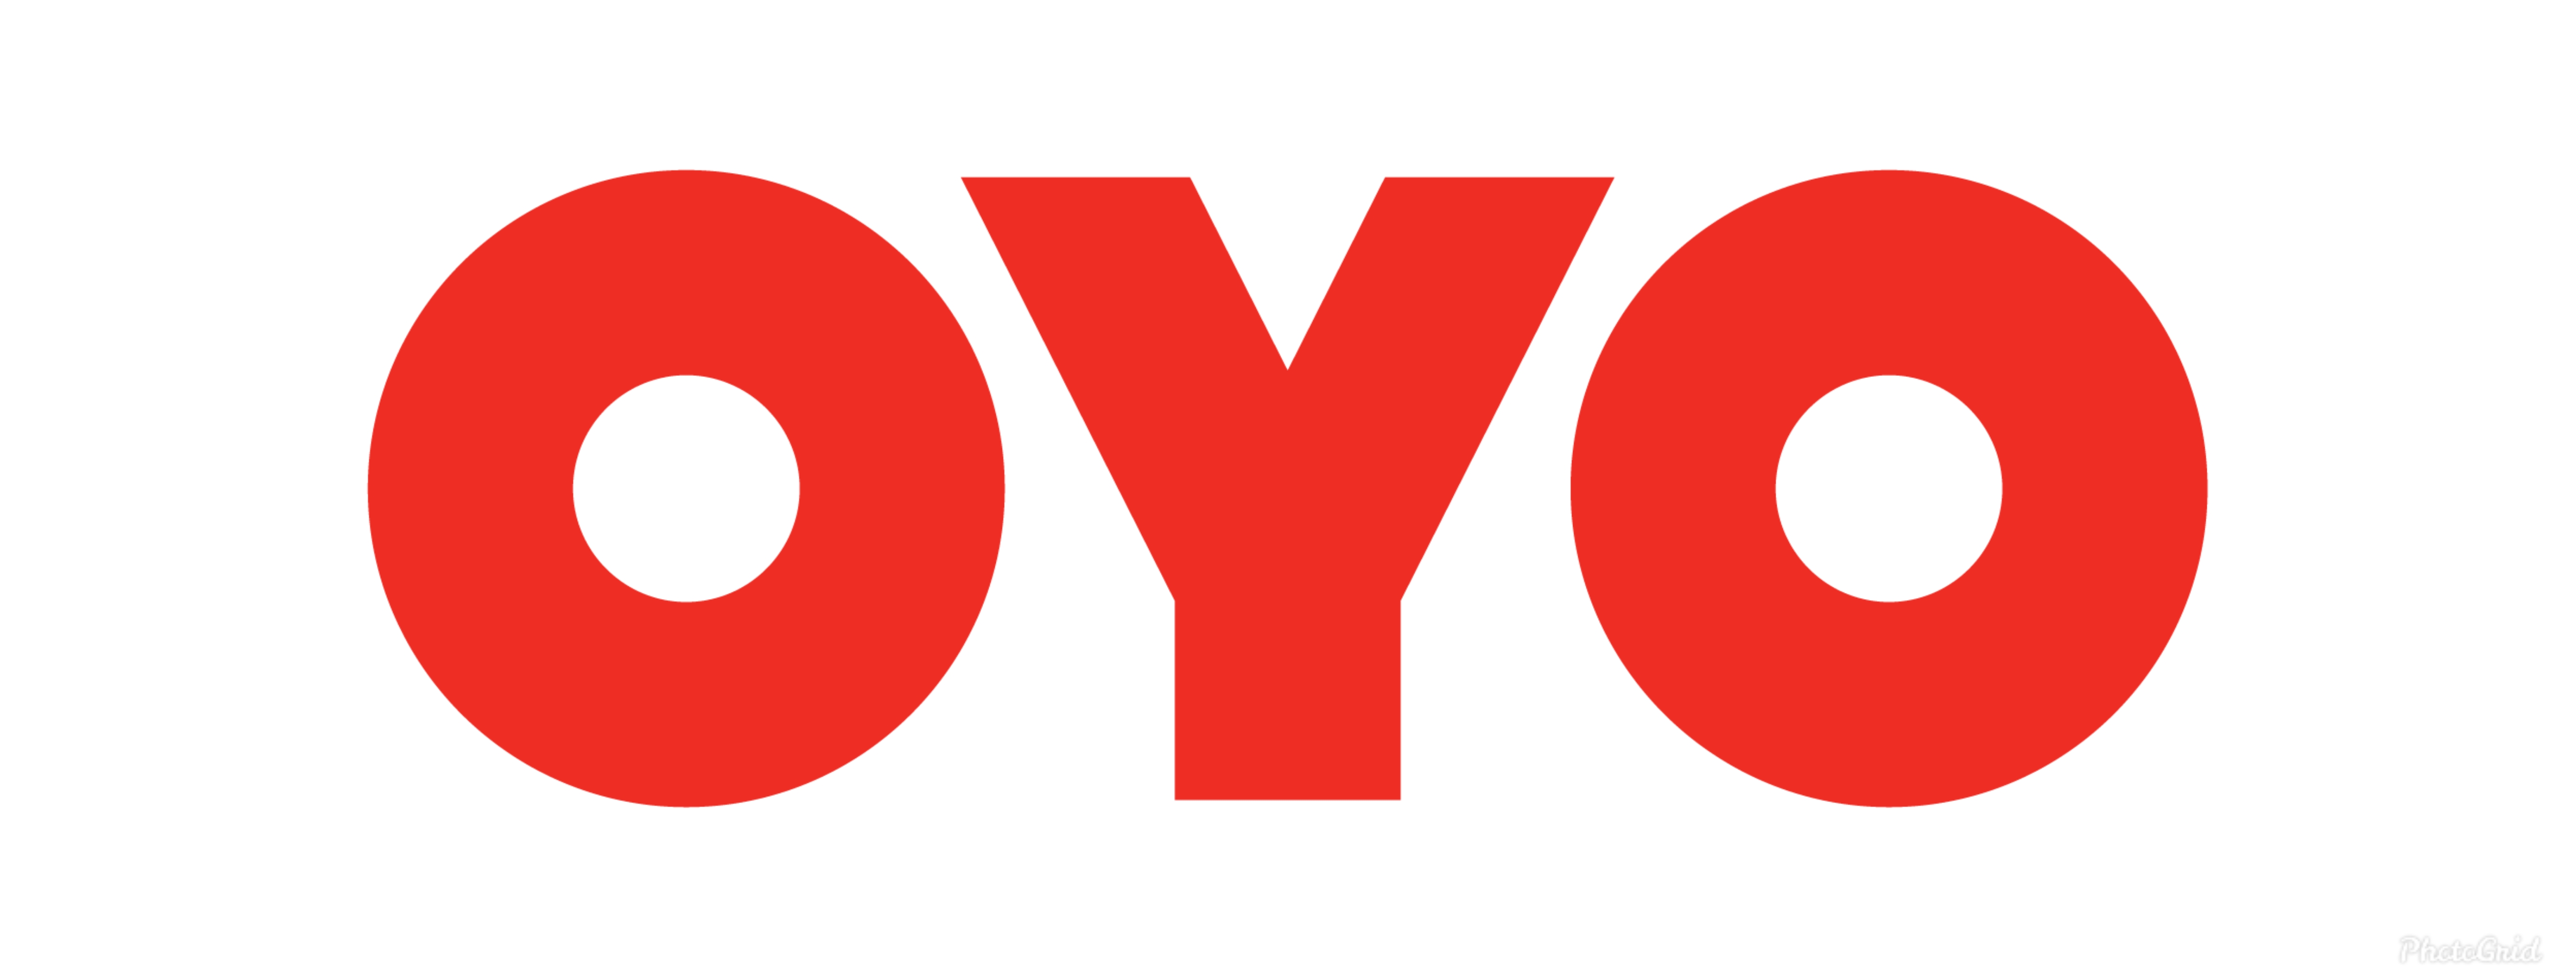 OYO Hotels & Homes Seek To Raise $1.5 Billion In The Latest Round Of ...